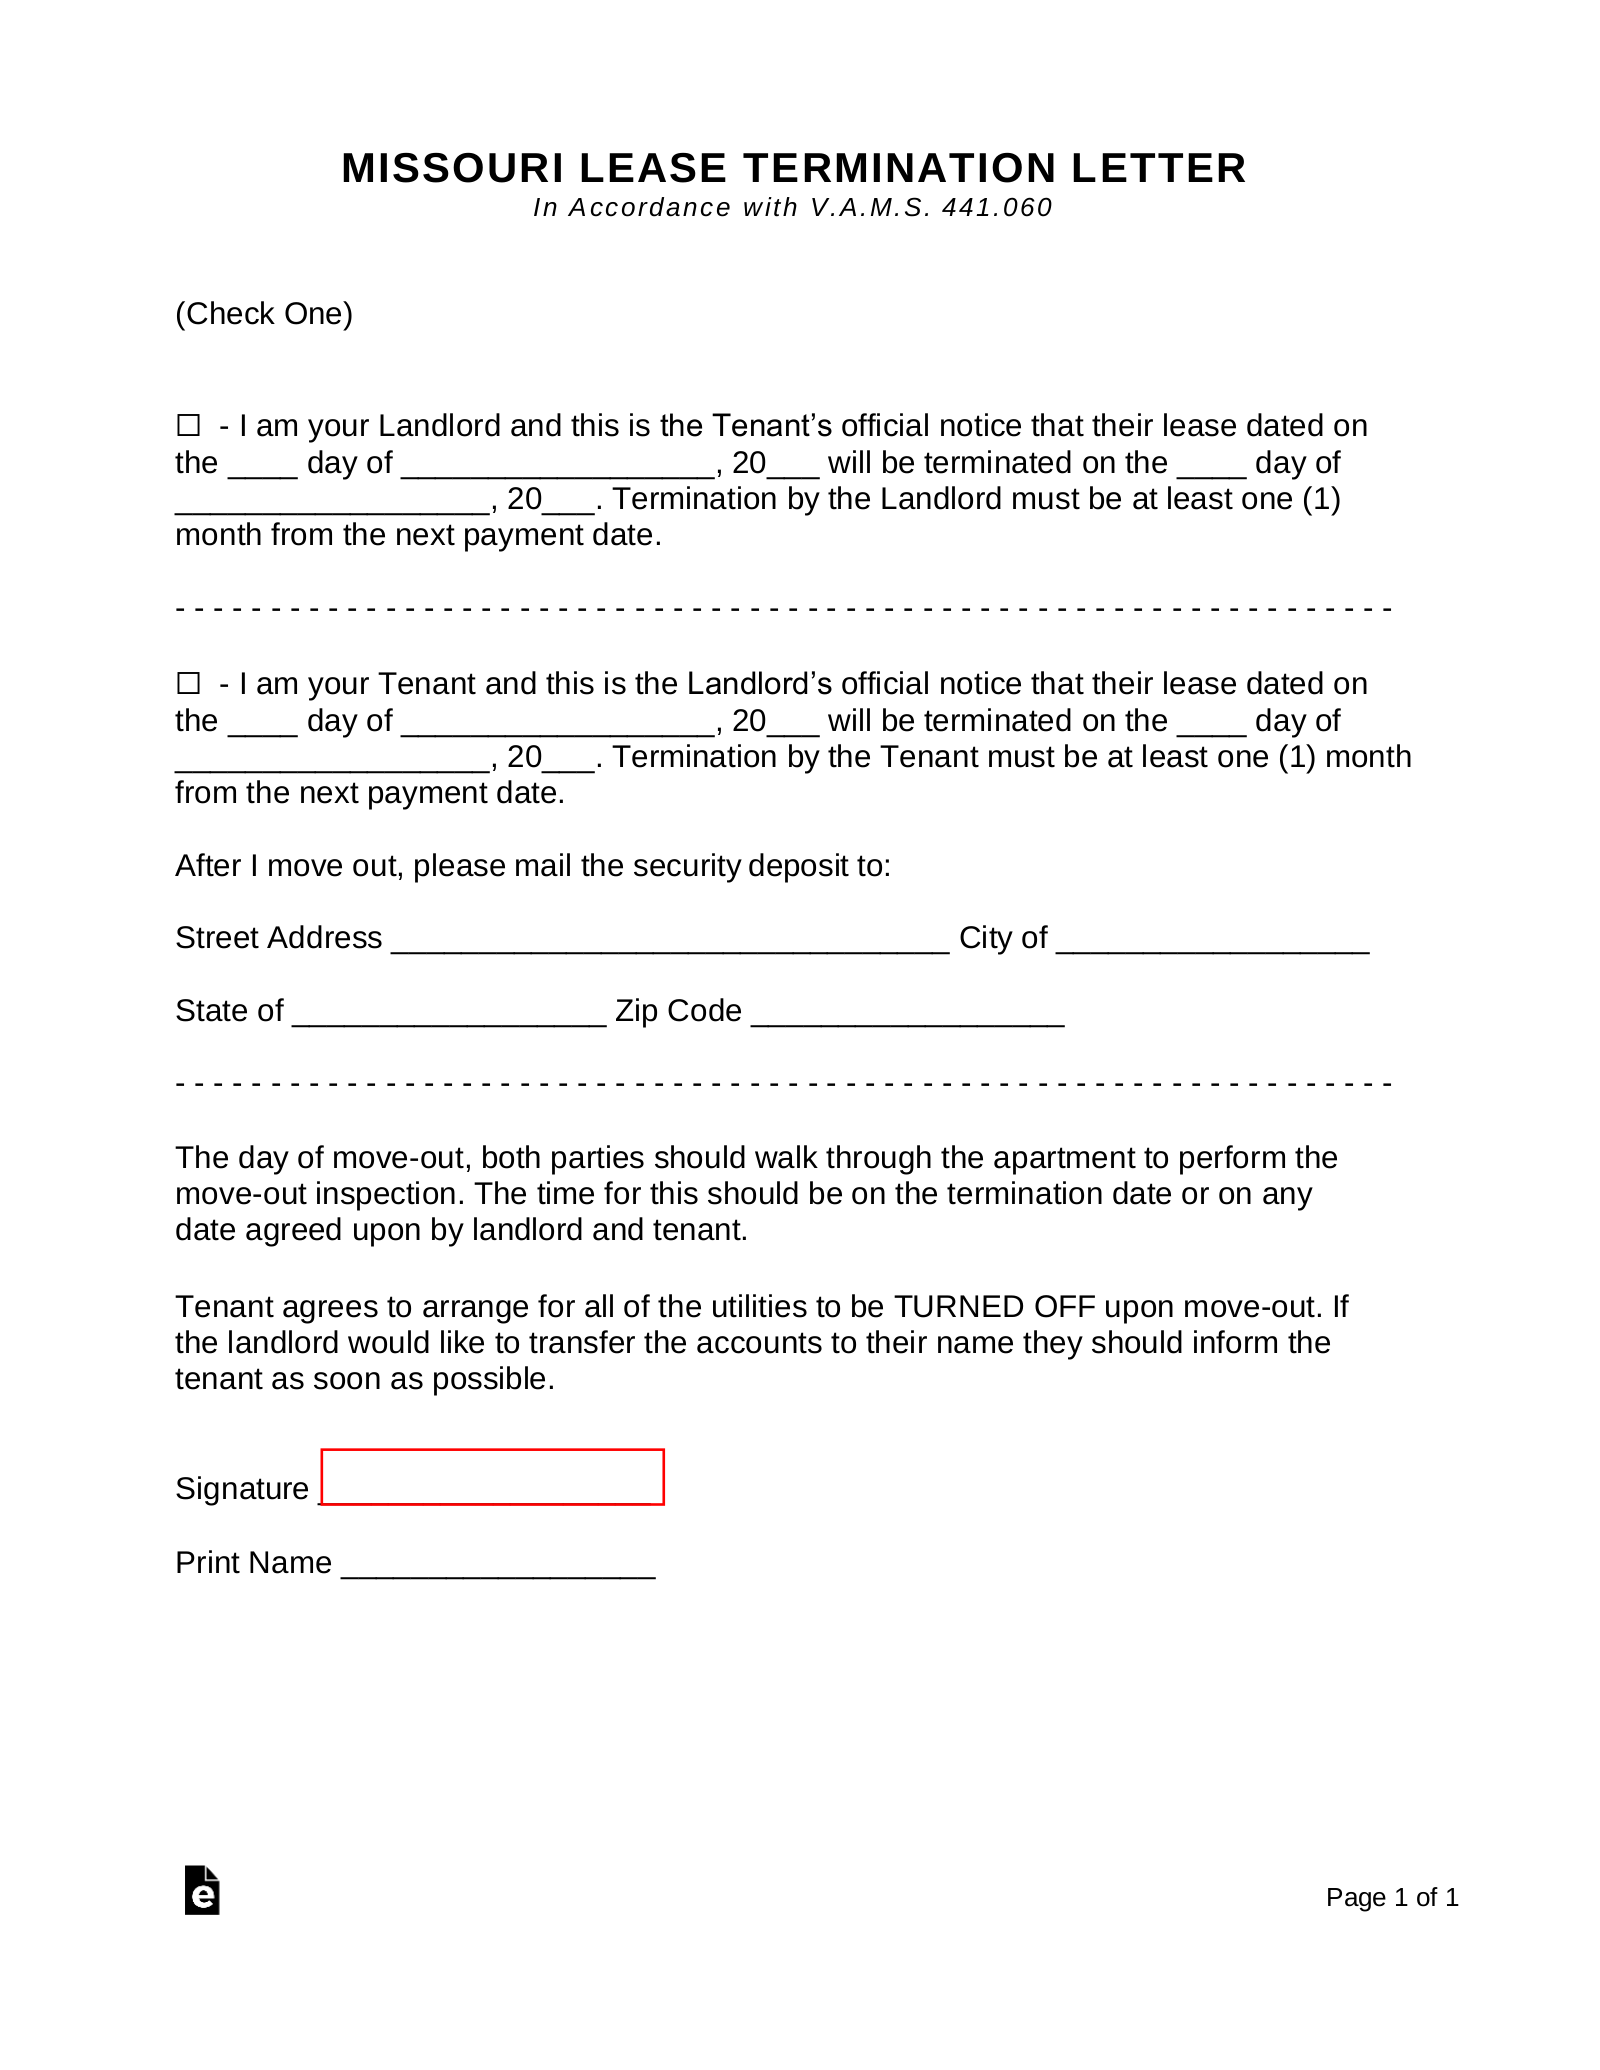 Missouri Lease Termination Letter Form | 30-Day Notice